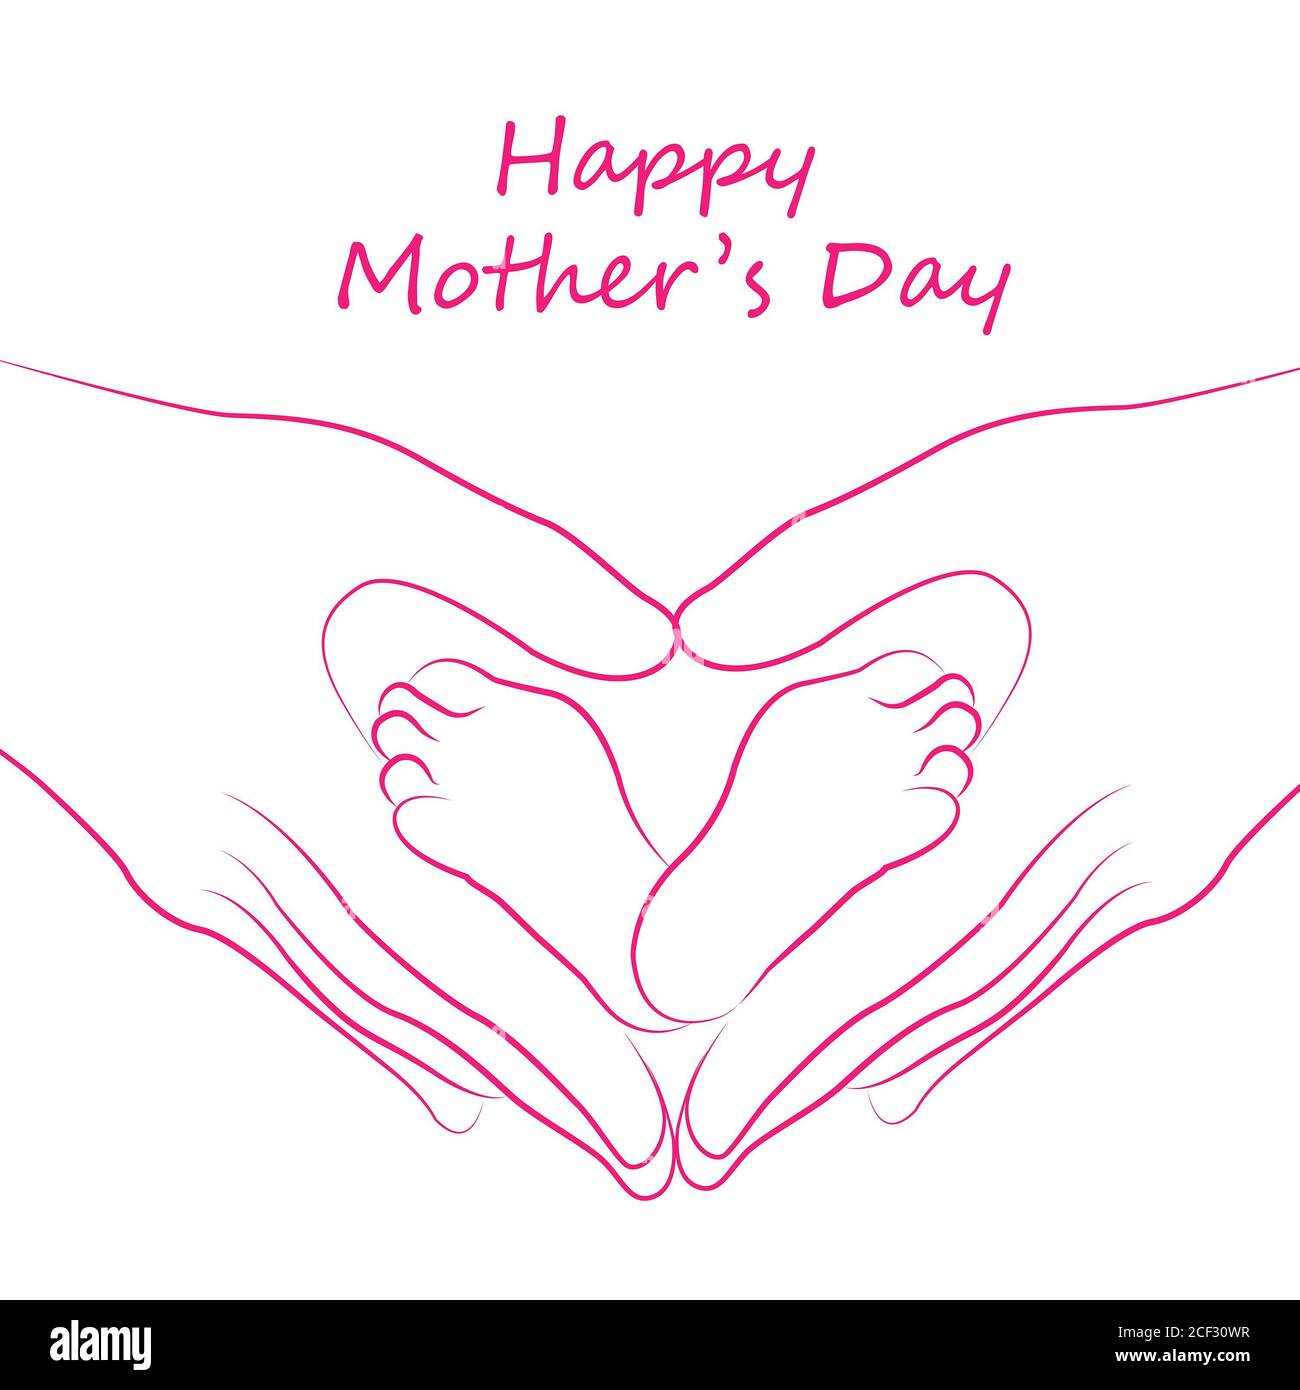 Happy mothers day illustration concept Stock Photo